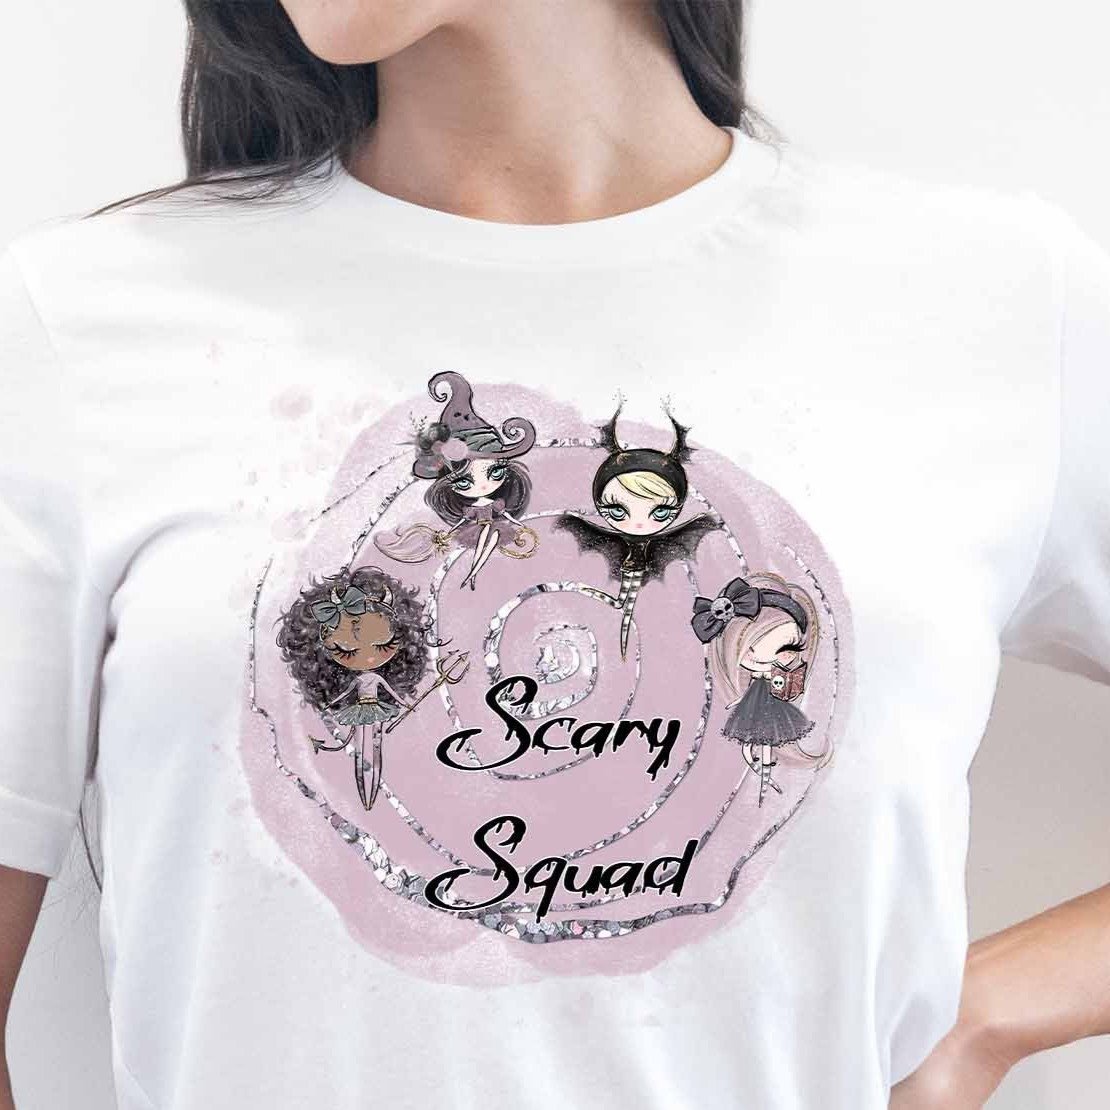 Scary Squad Graphic Tee - My Custom Tee Party